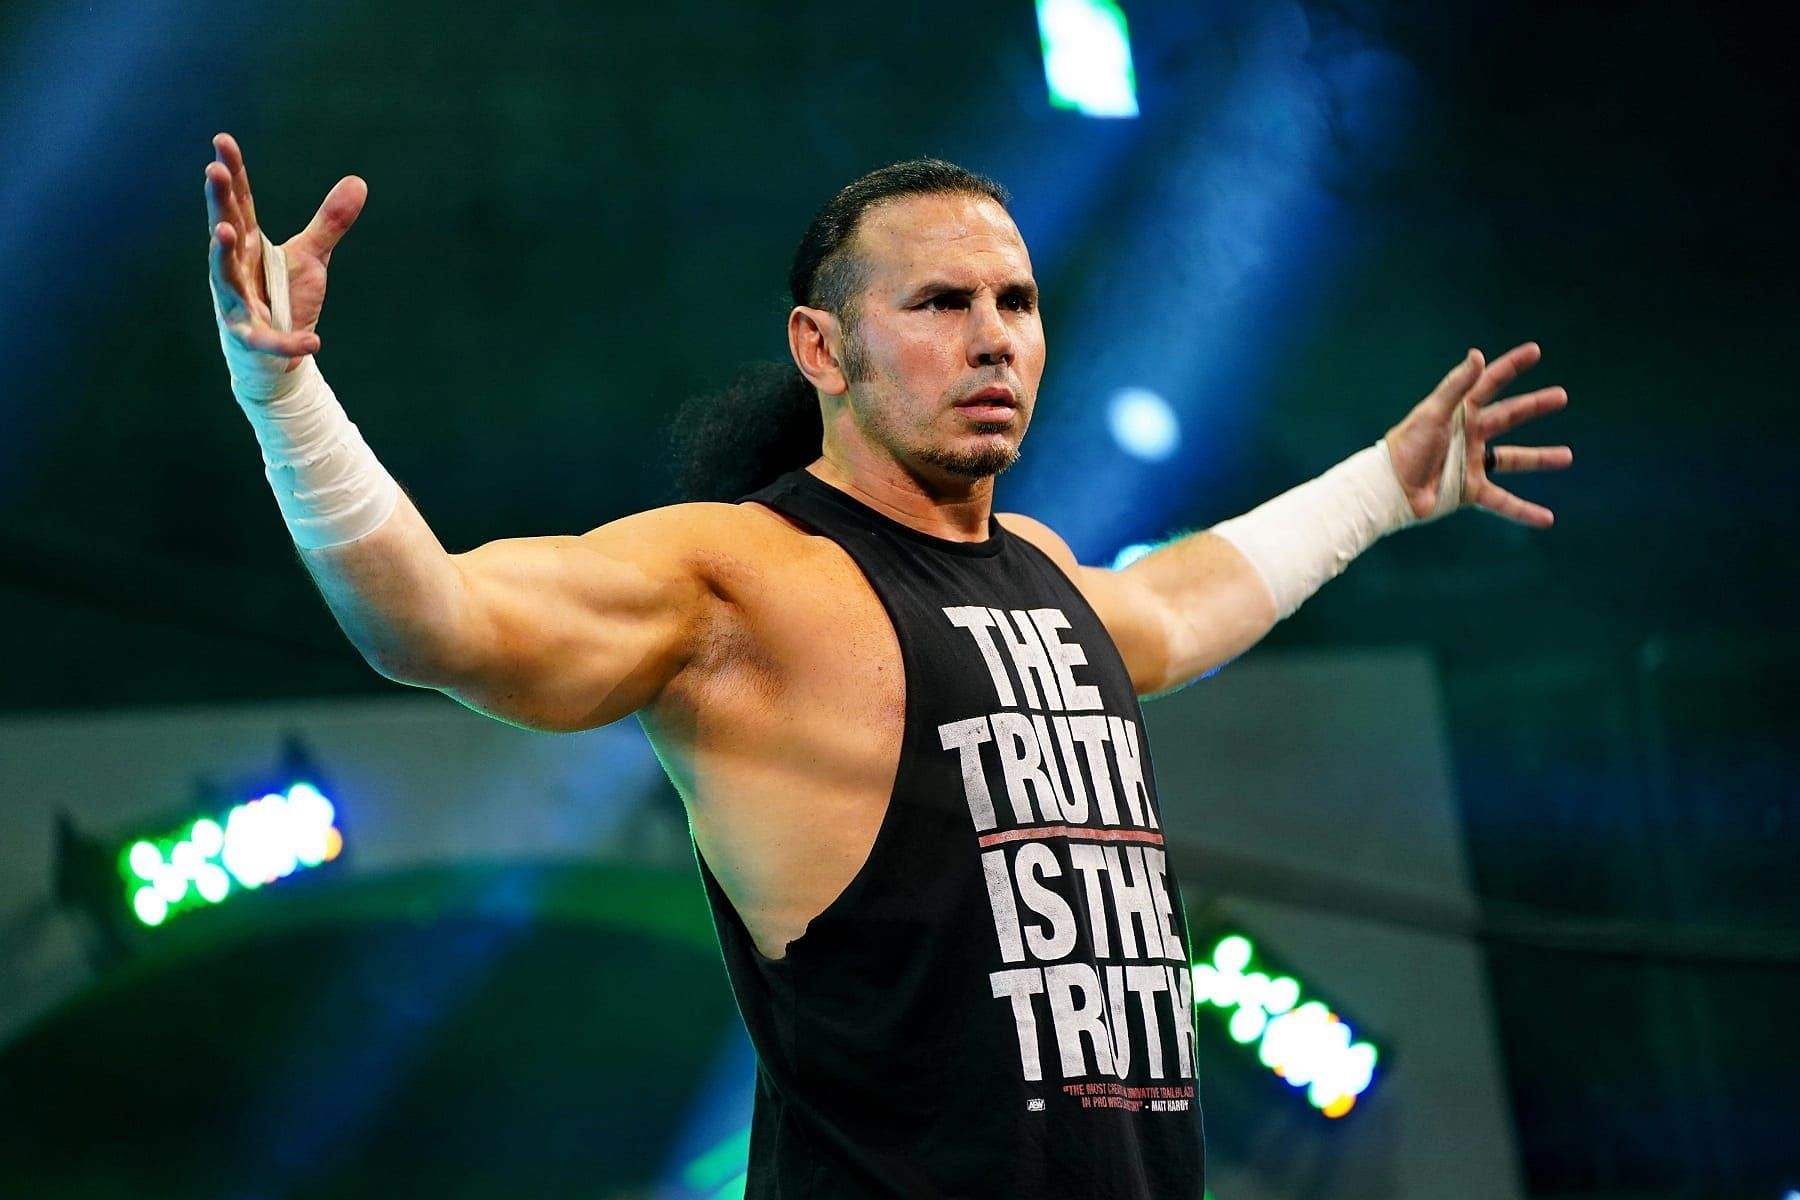 Matt Hardy is one of the most experienced wrestlers still active today